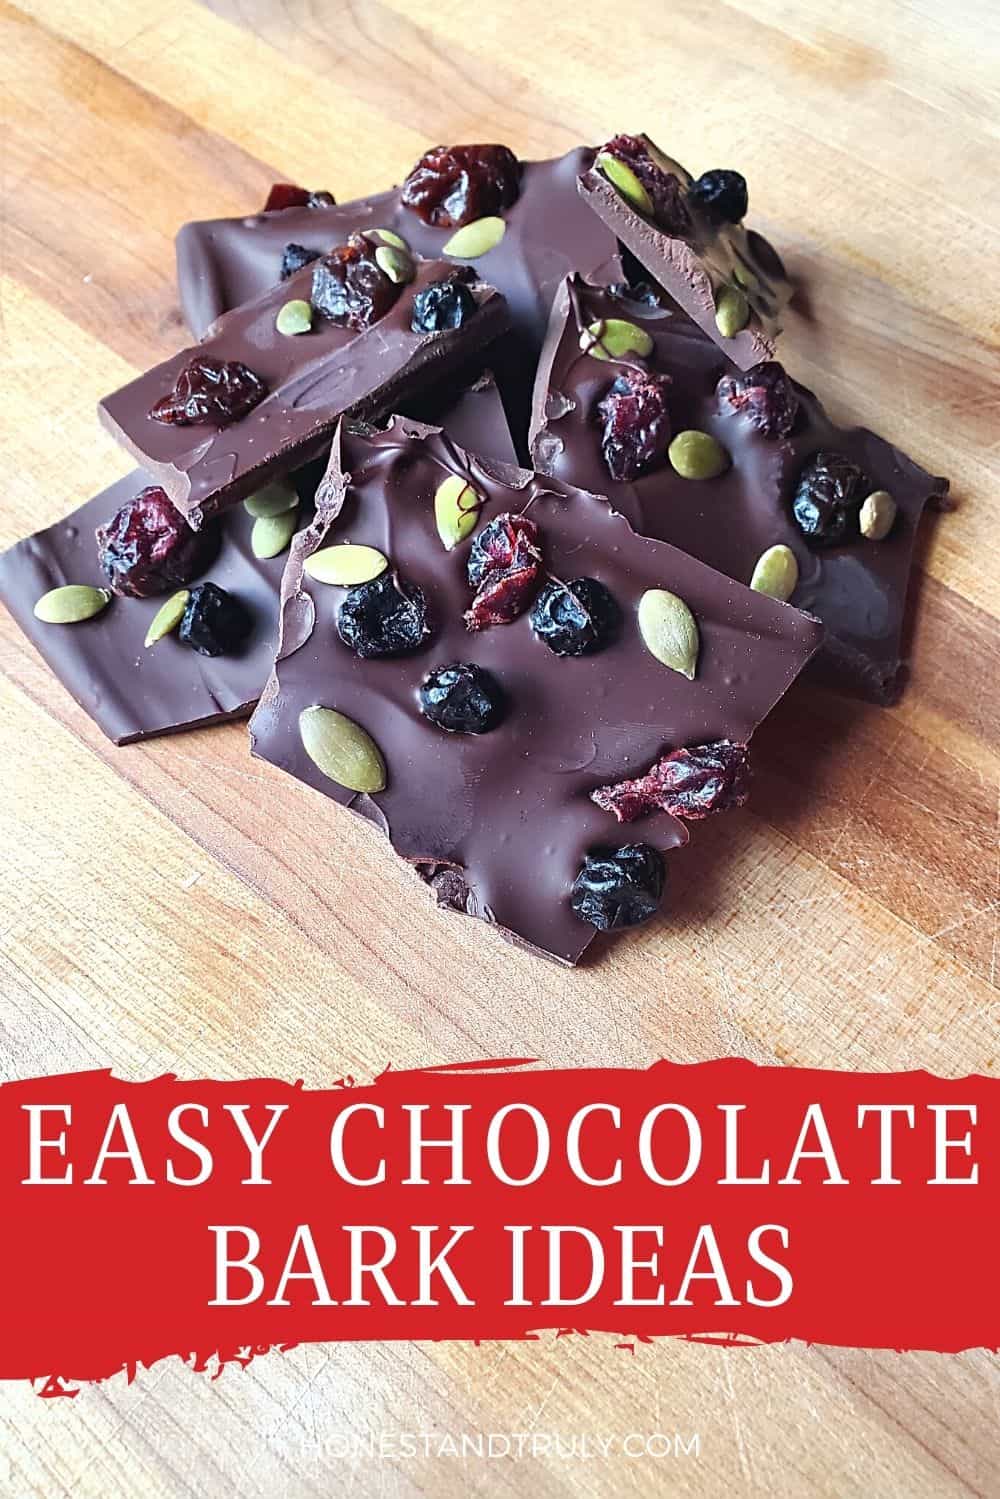 Three quarters view of chocolate bark with text easy chocolate bark ideas.